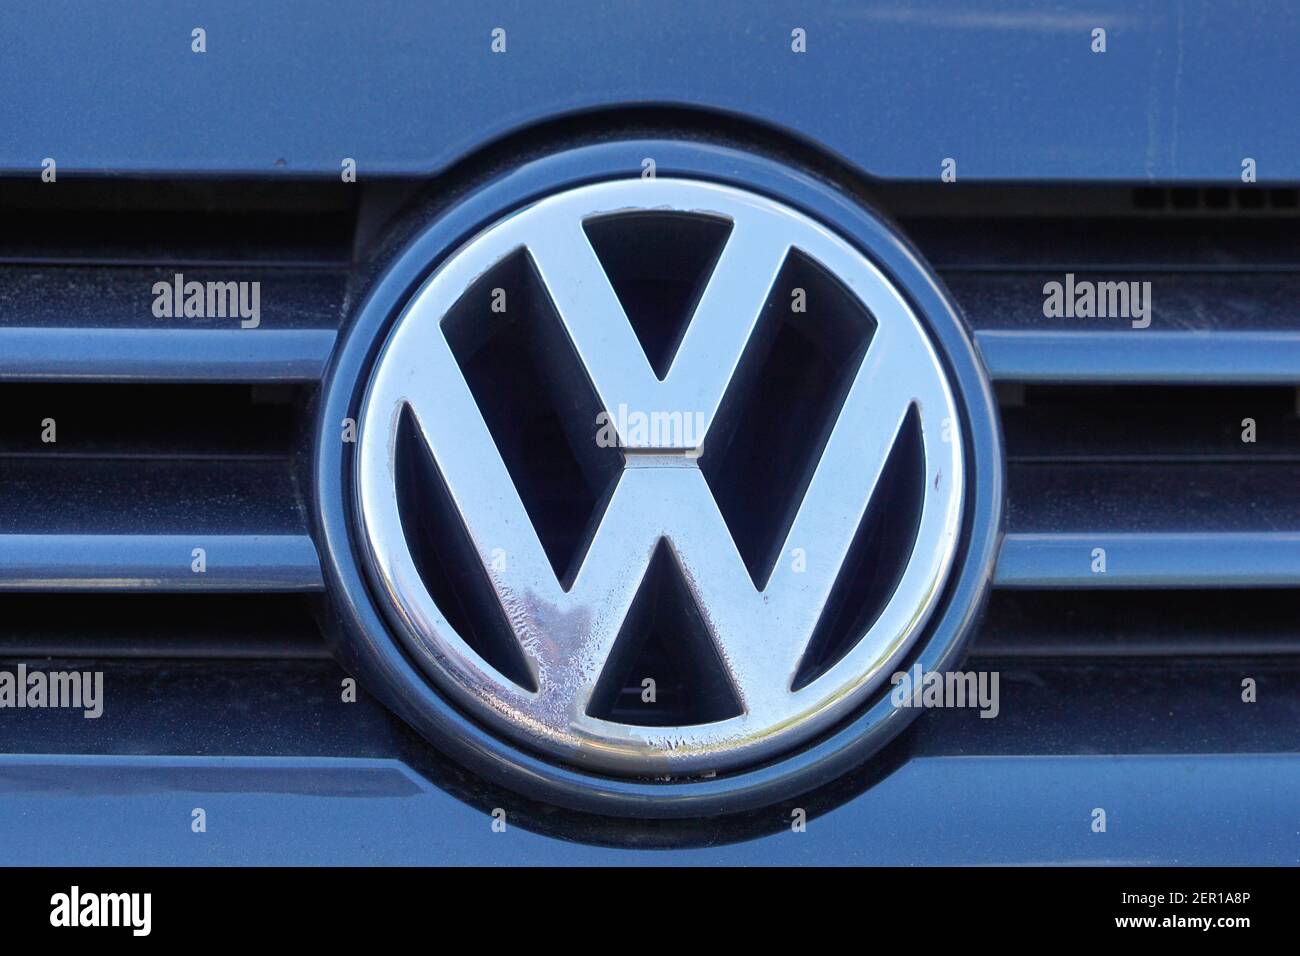 Belgrade, Serbia - August 13, 2016: Famous VW Volkswagen sign German cars manufacturer at front of vehicle. Stock Photo